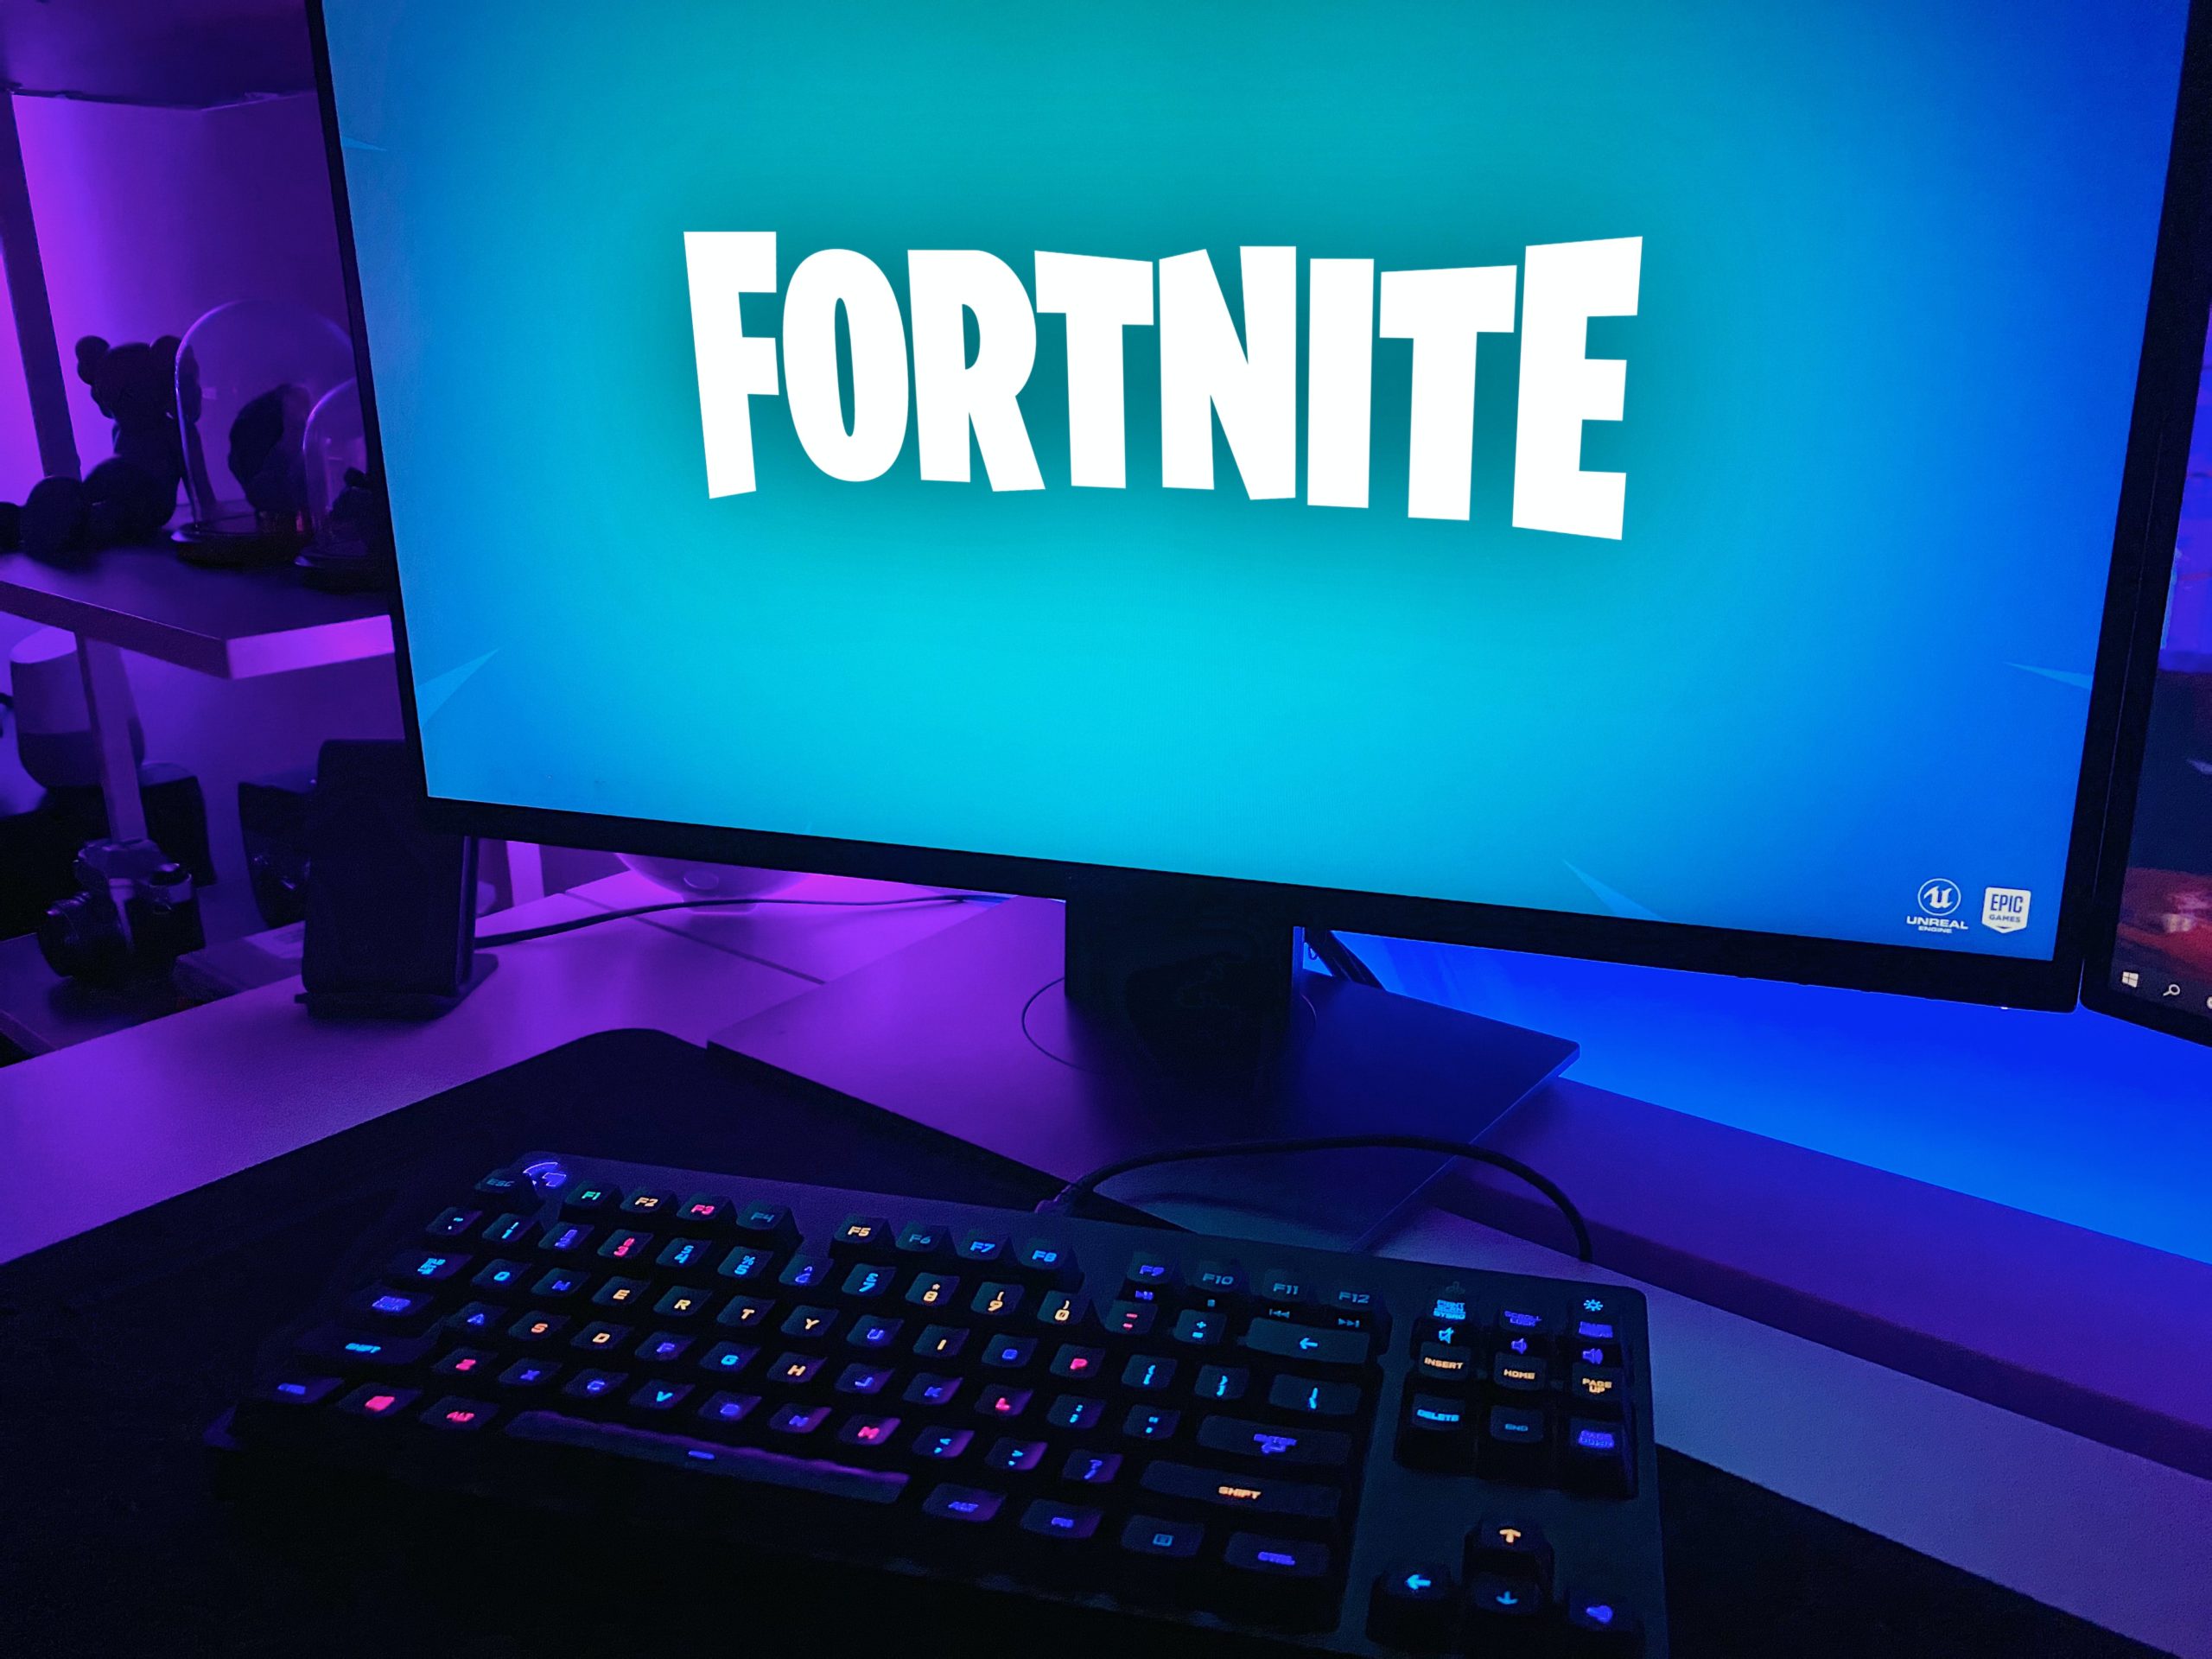 Fortnite is now available on  Luna — GAMINGTREND